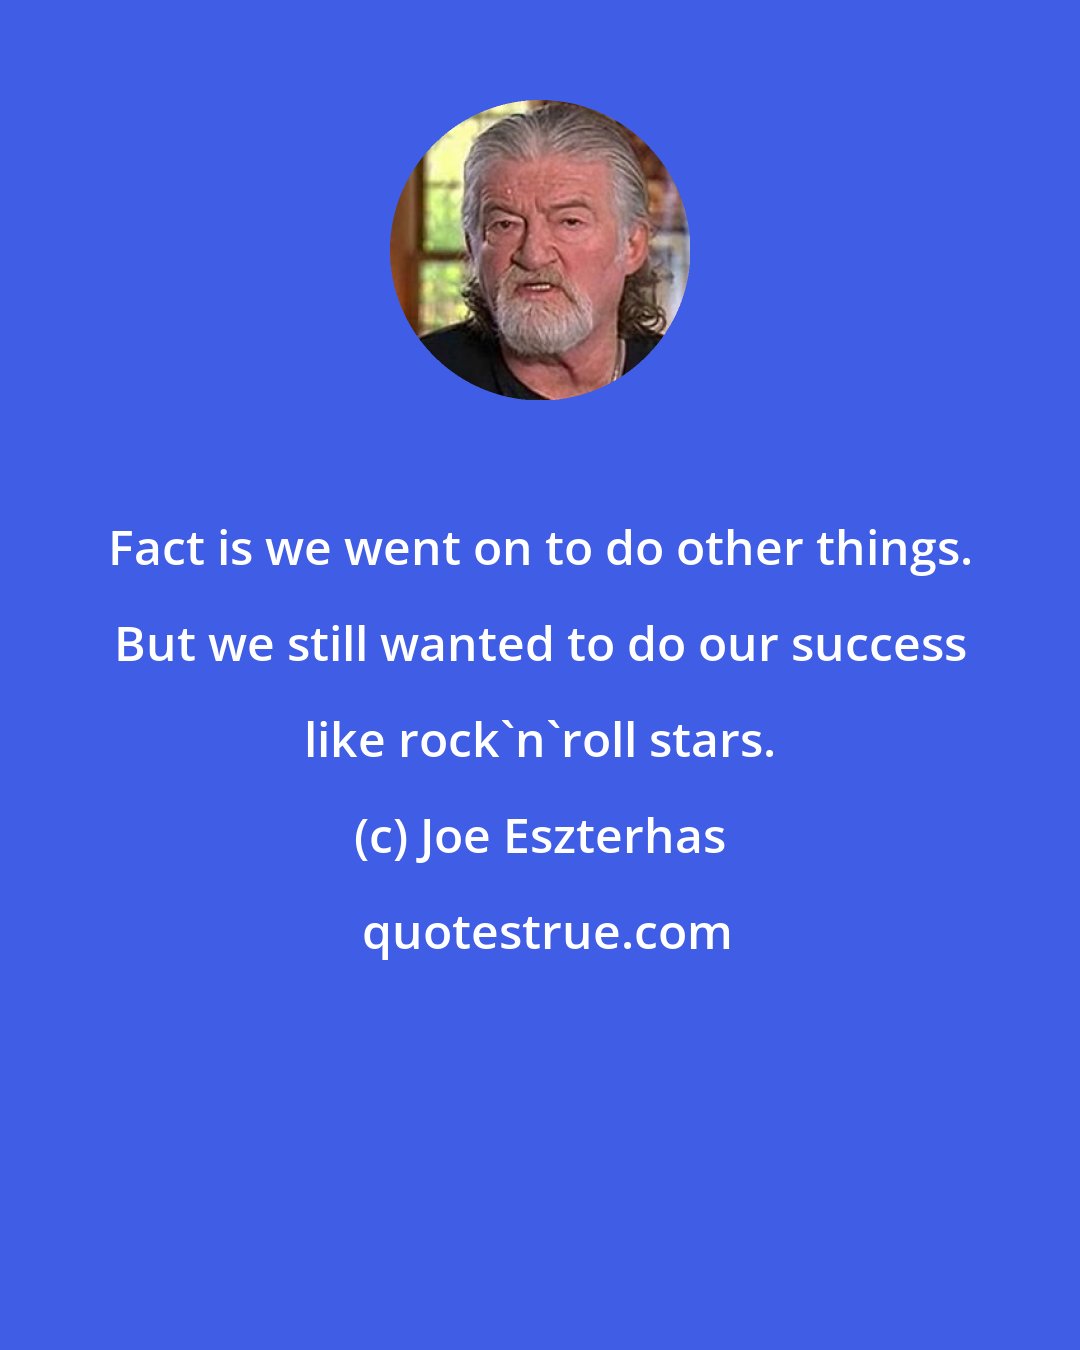 Joe Eszterhas: Fact is we went on to do other things. But we still wanted to do our success like rock'n'roll stars.